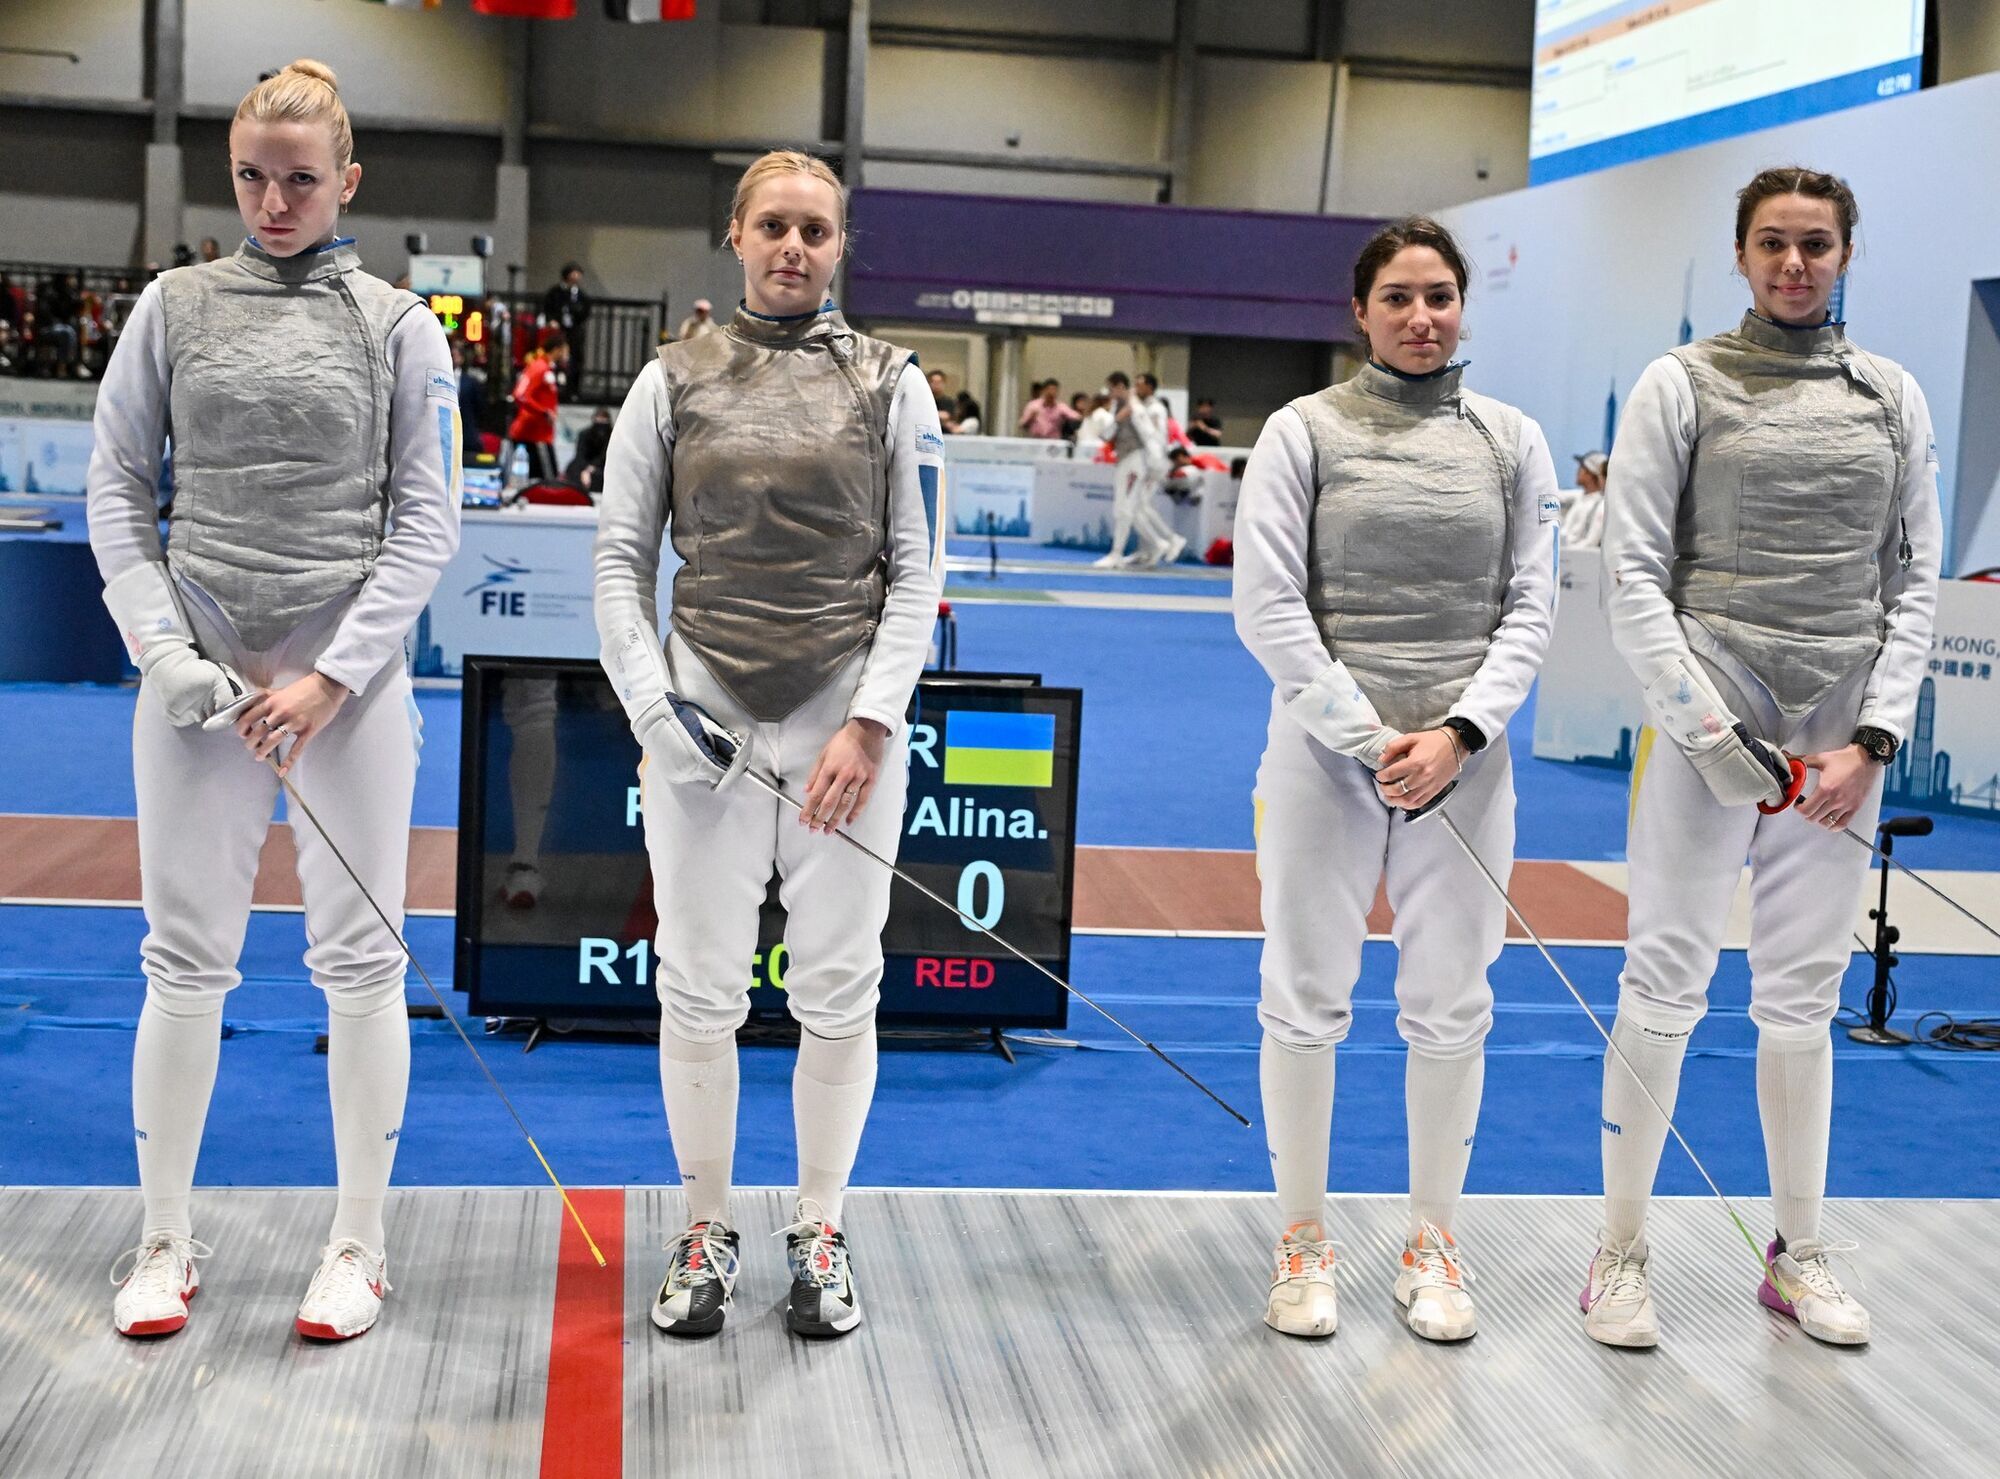 Ukraine wins medal for the first time in history at the World Fencing Cup